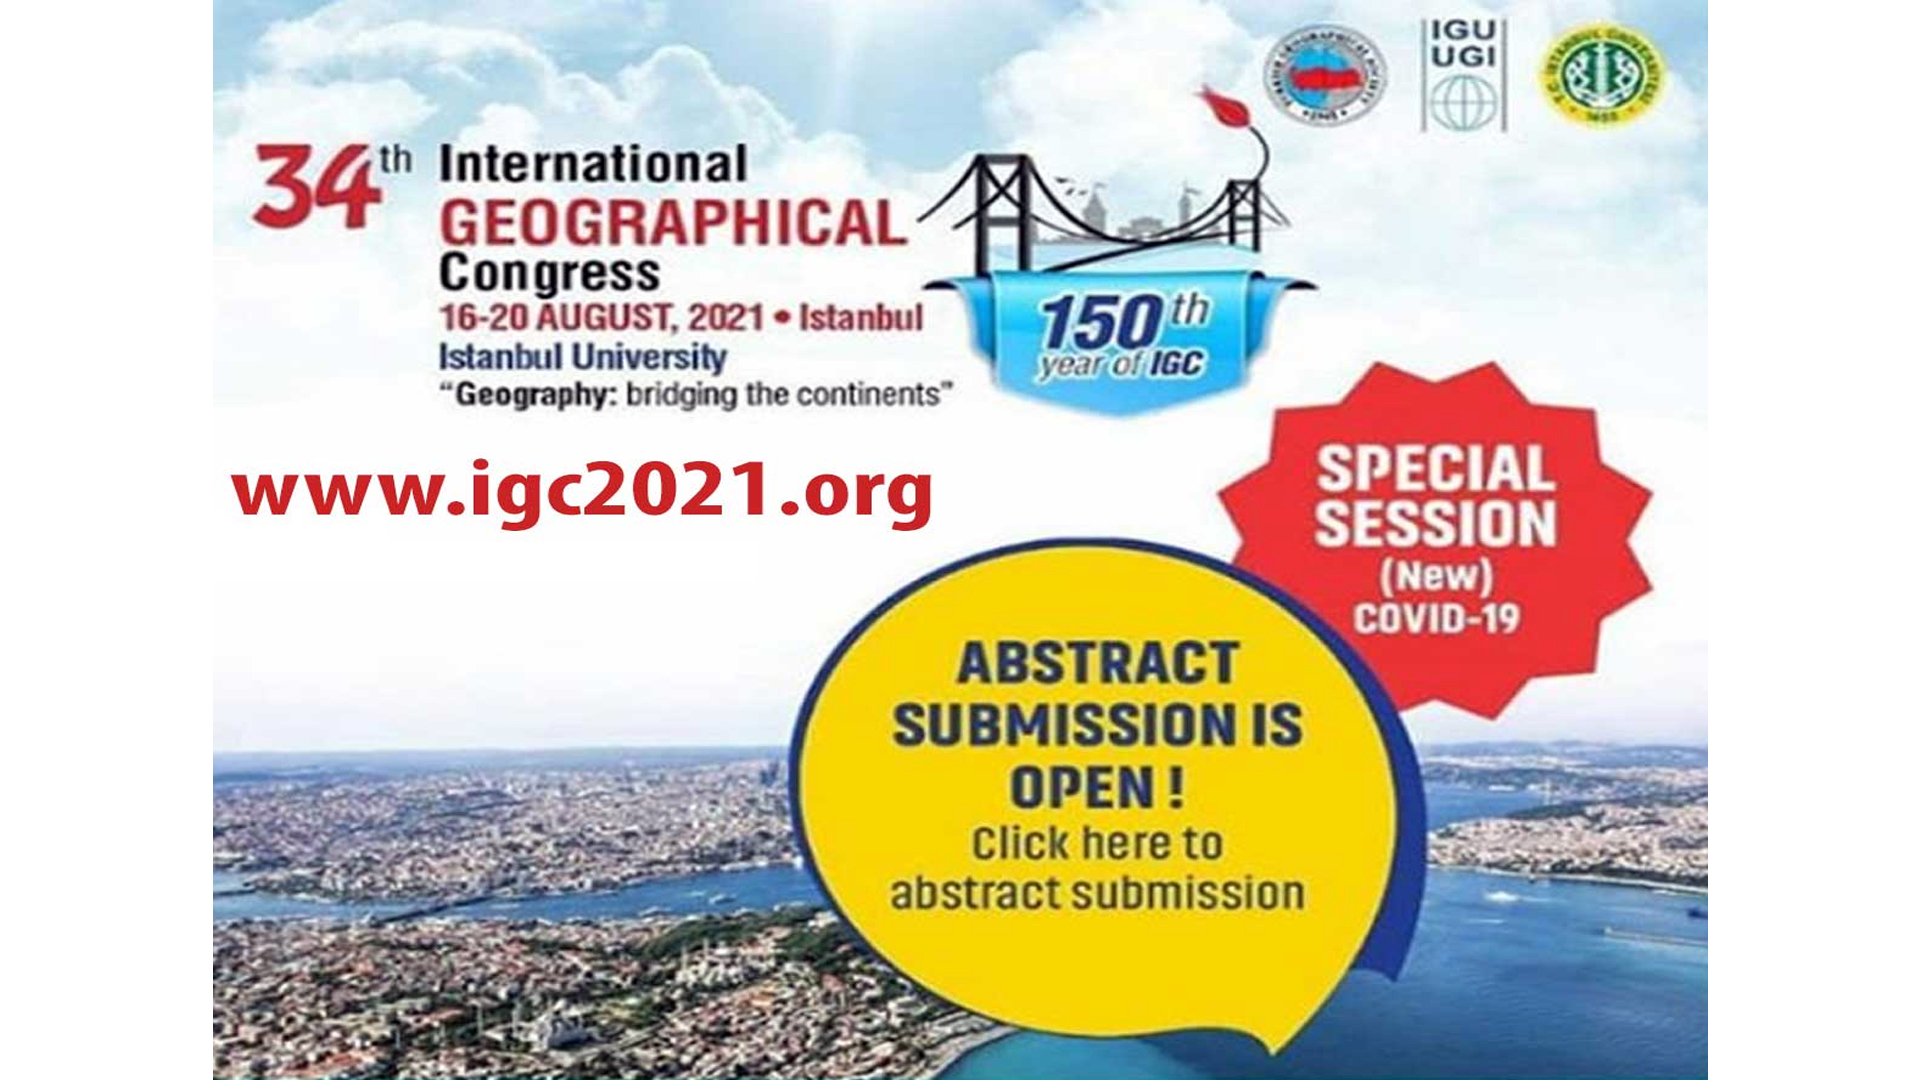 34th INTERNATIONAL GEOGRAPHICAL CONGRESS